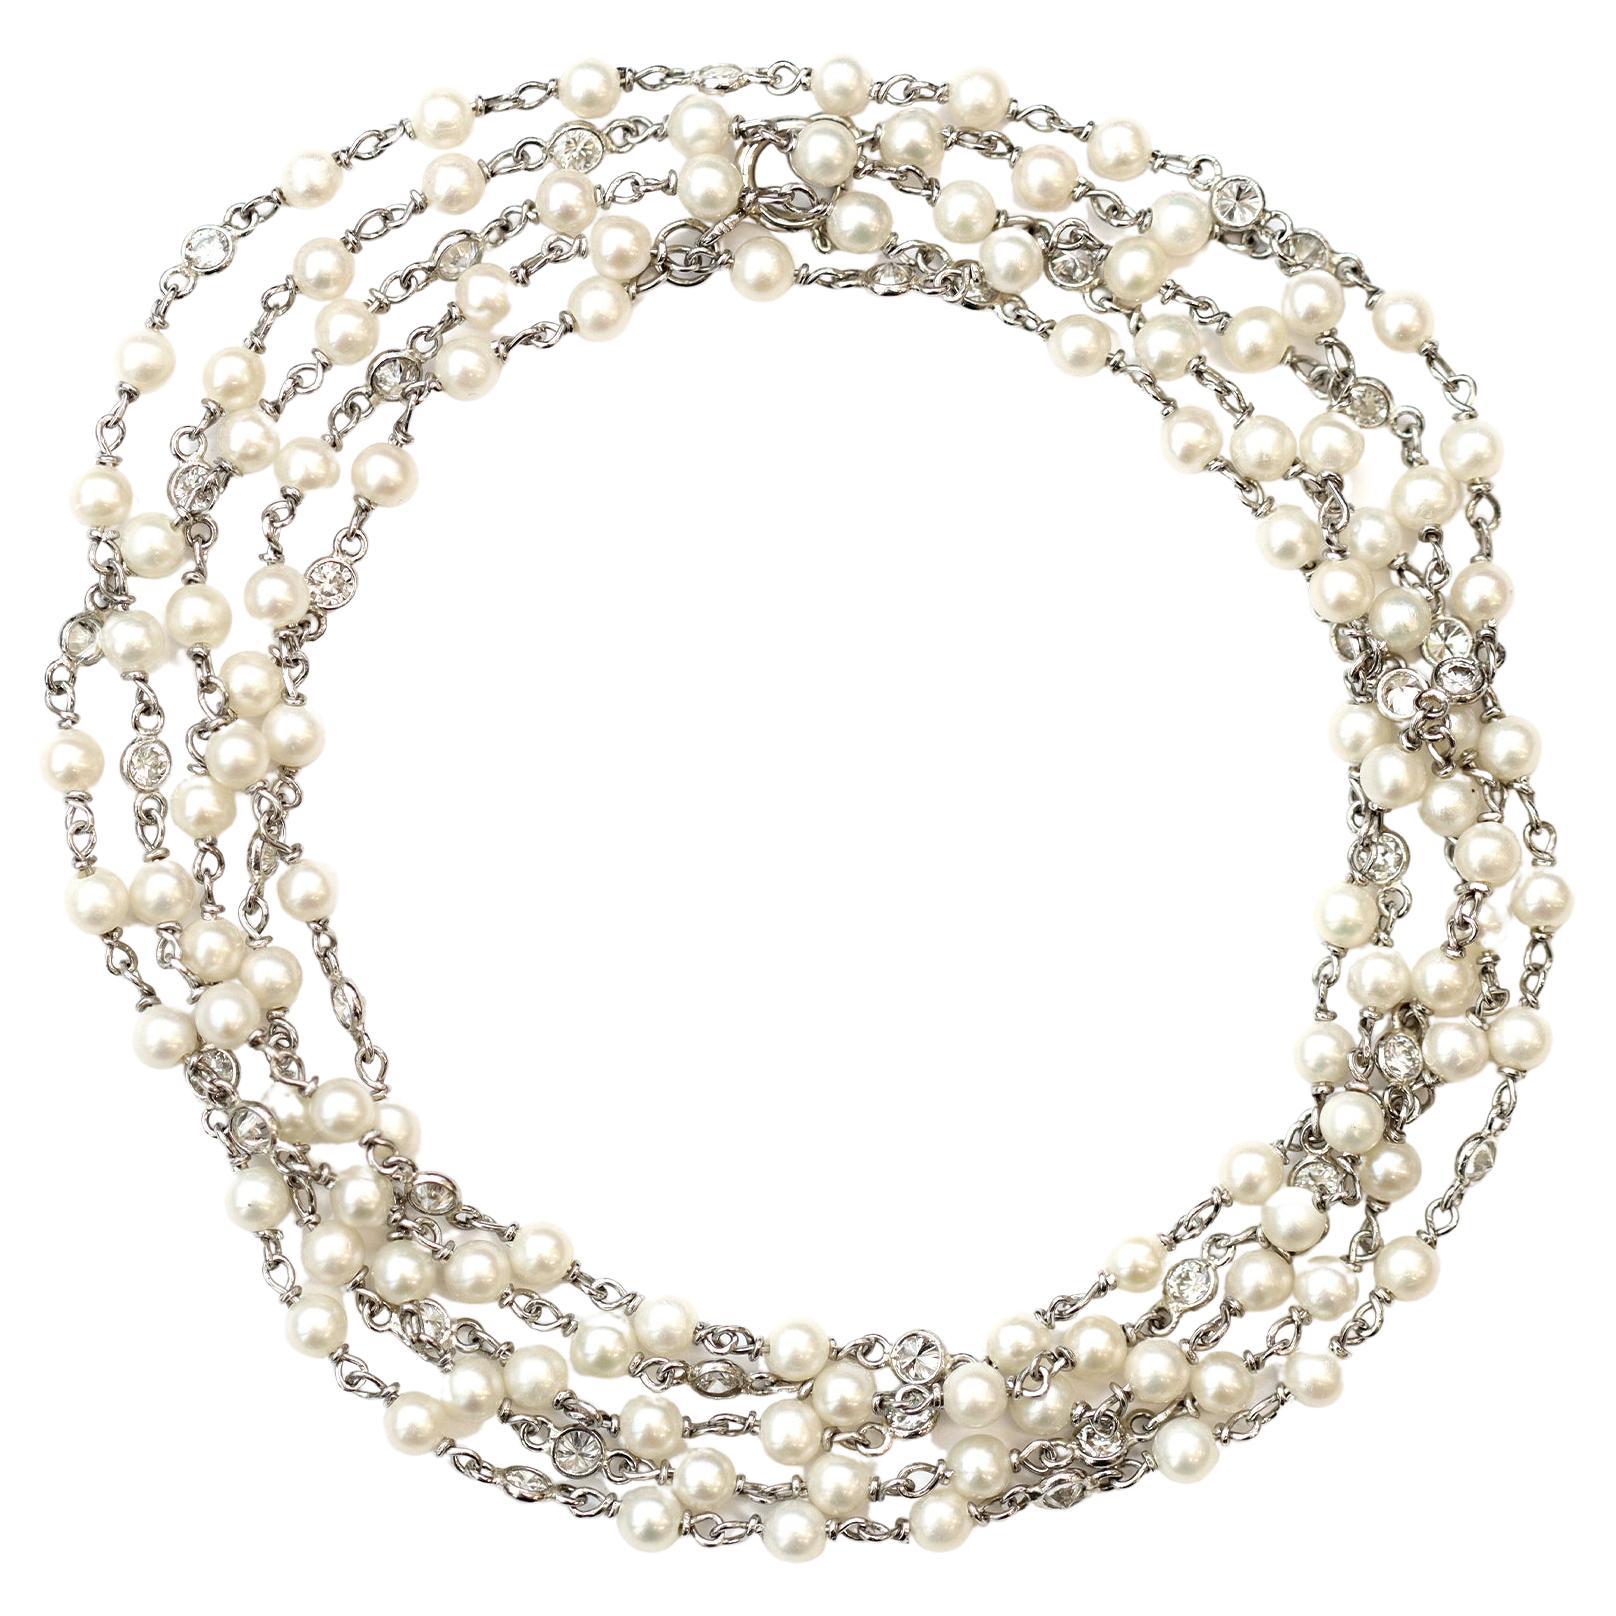 Rosaria Varra Seed Pearl and Diamond Opera Necklace in Platinum